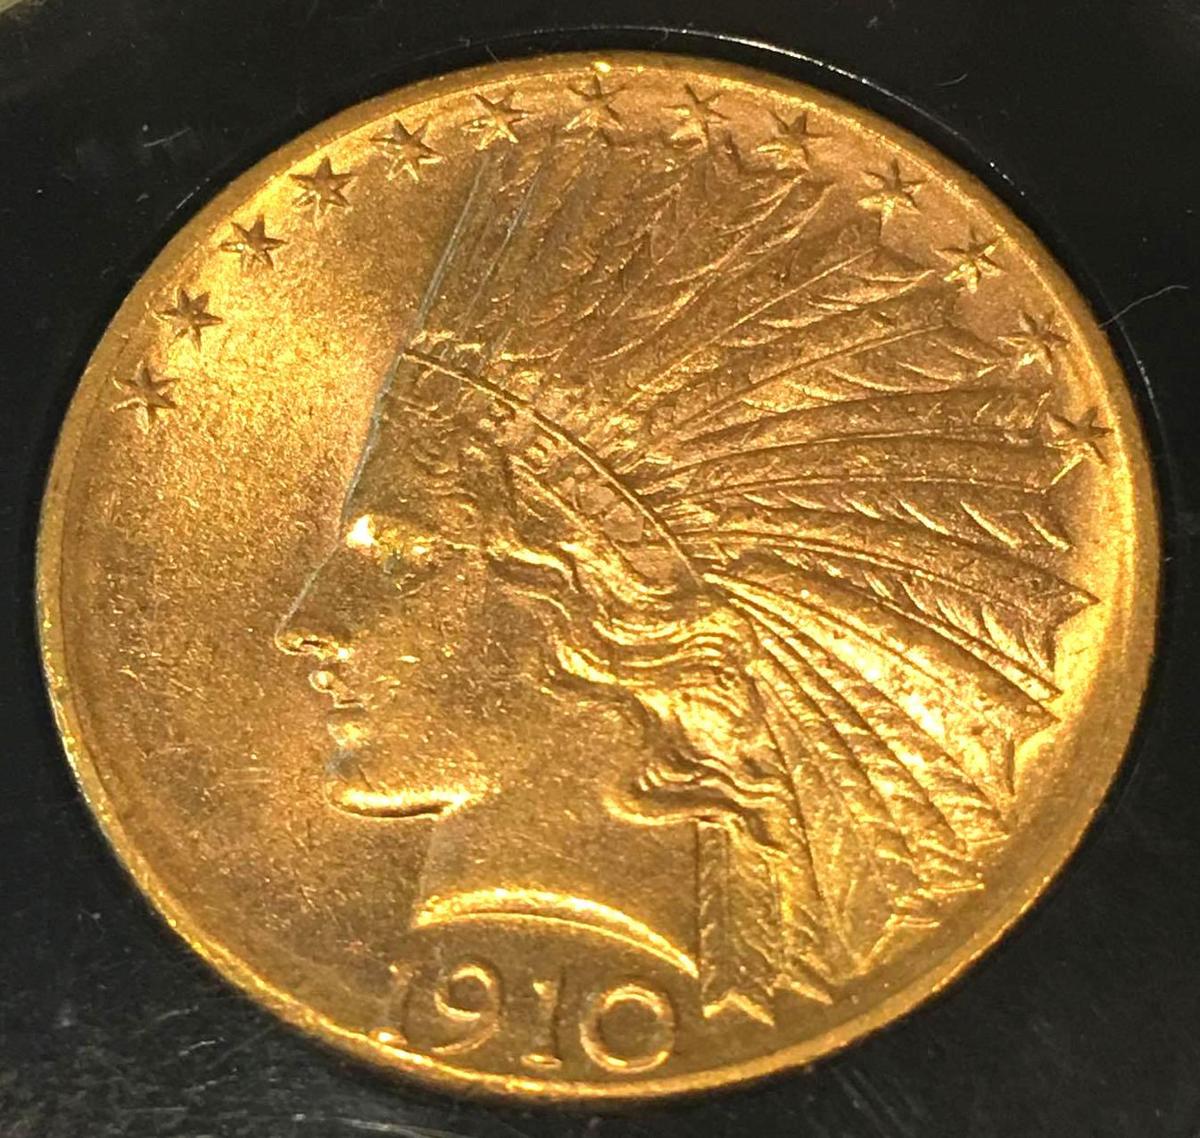 GOLD 1910-D $10 Indian Head Gold Coin Estimated MS